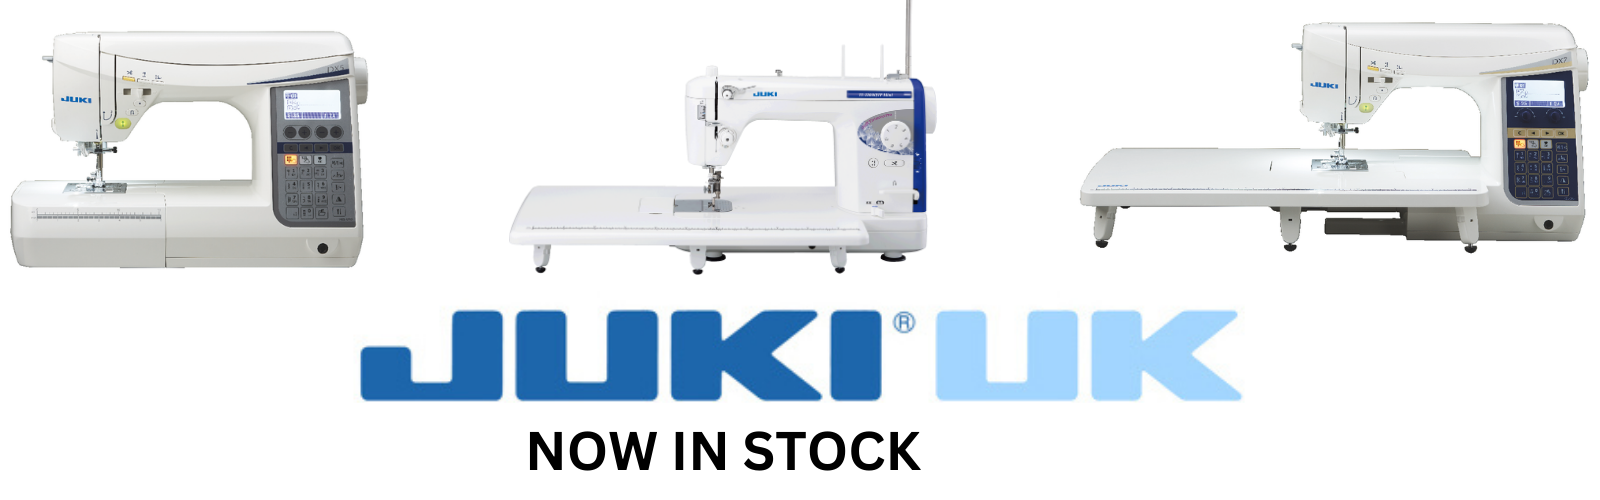 Juki Machine now in stock at Sewing Direct